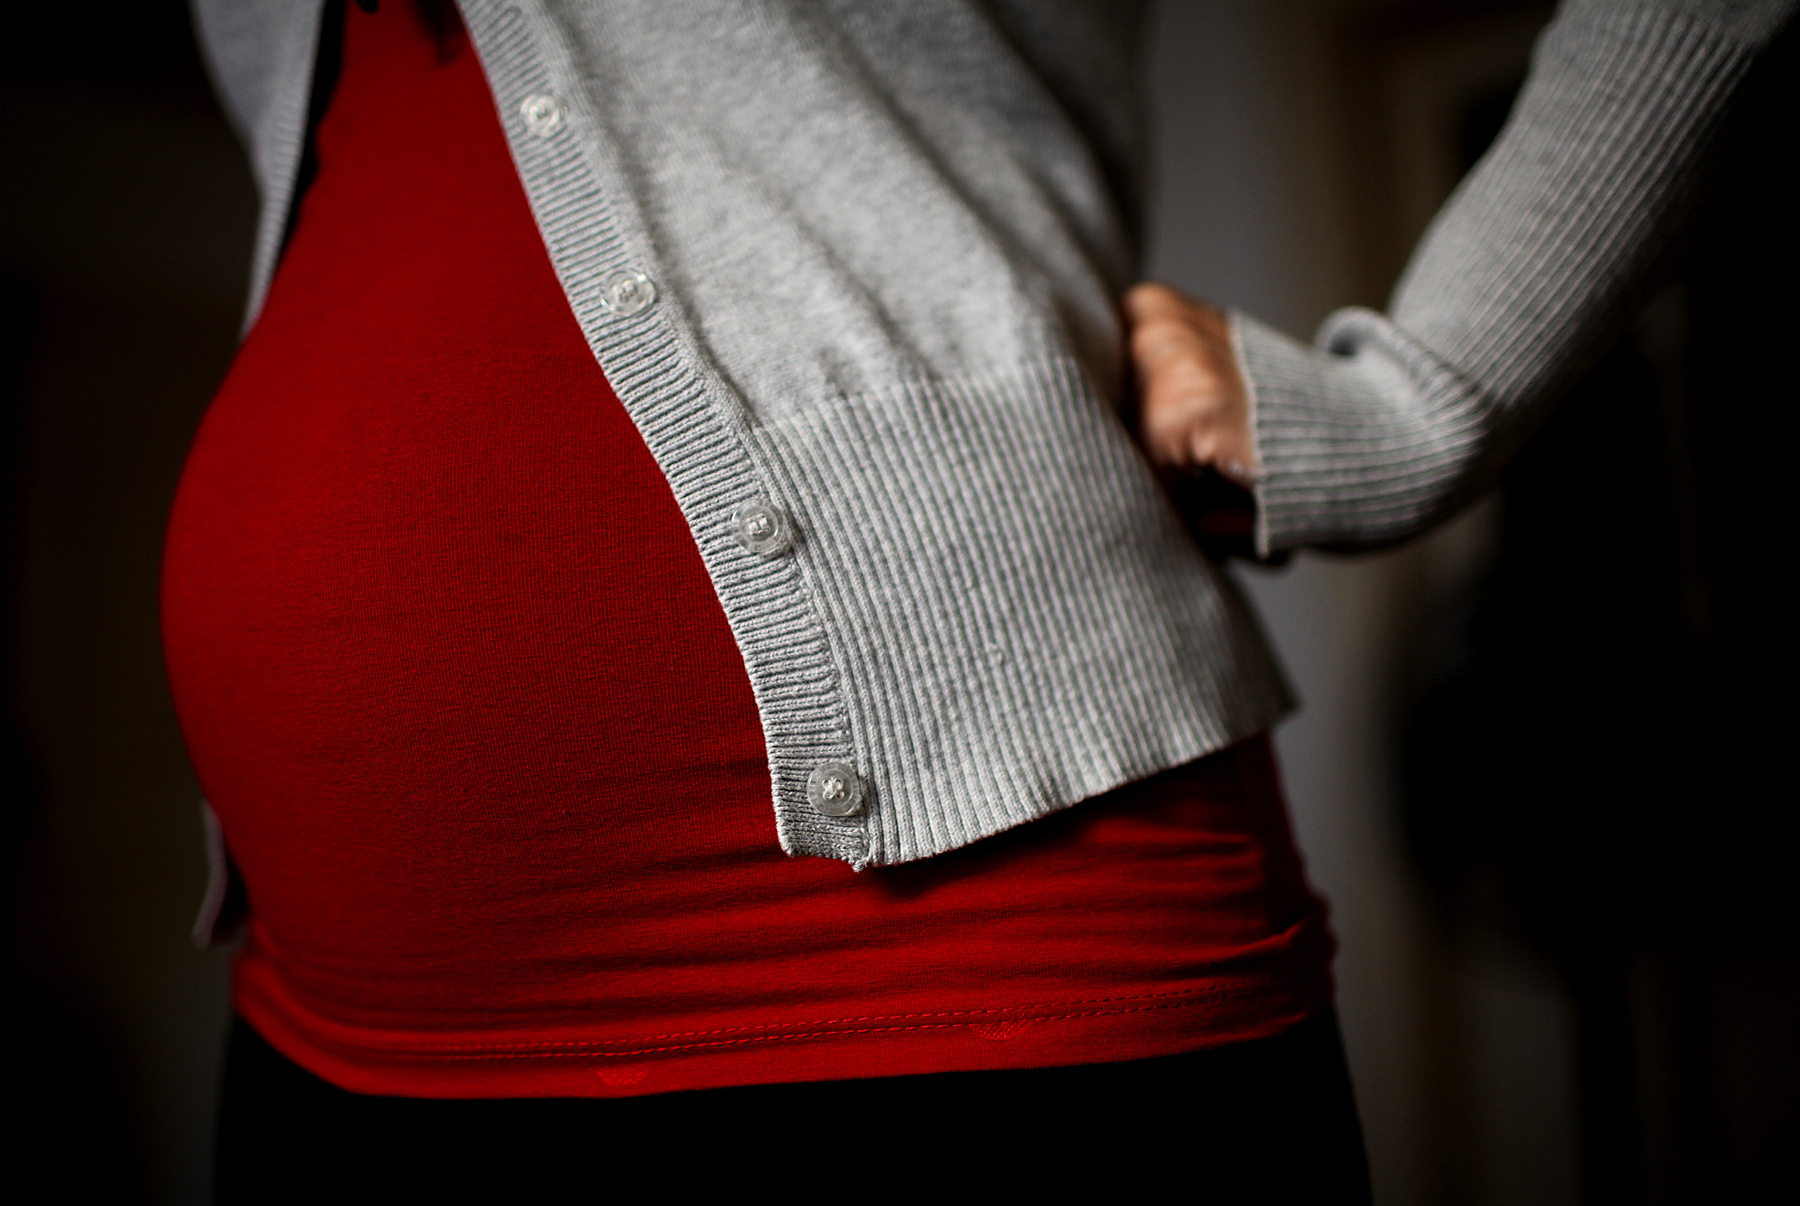 A pregnant woman with a red sweater.